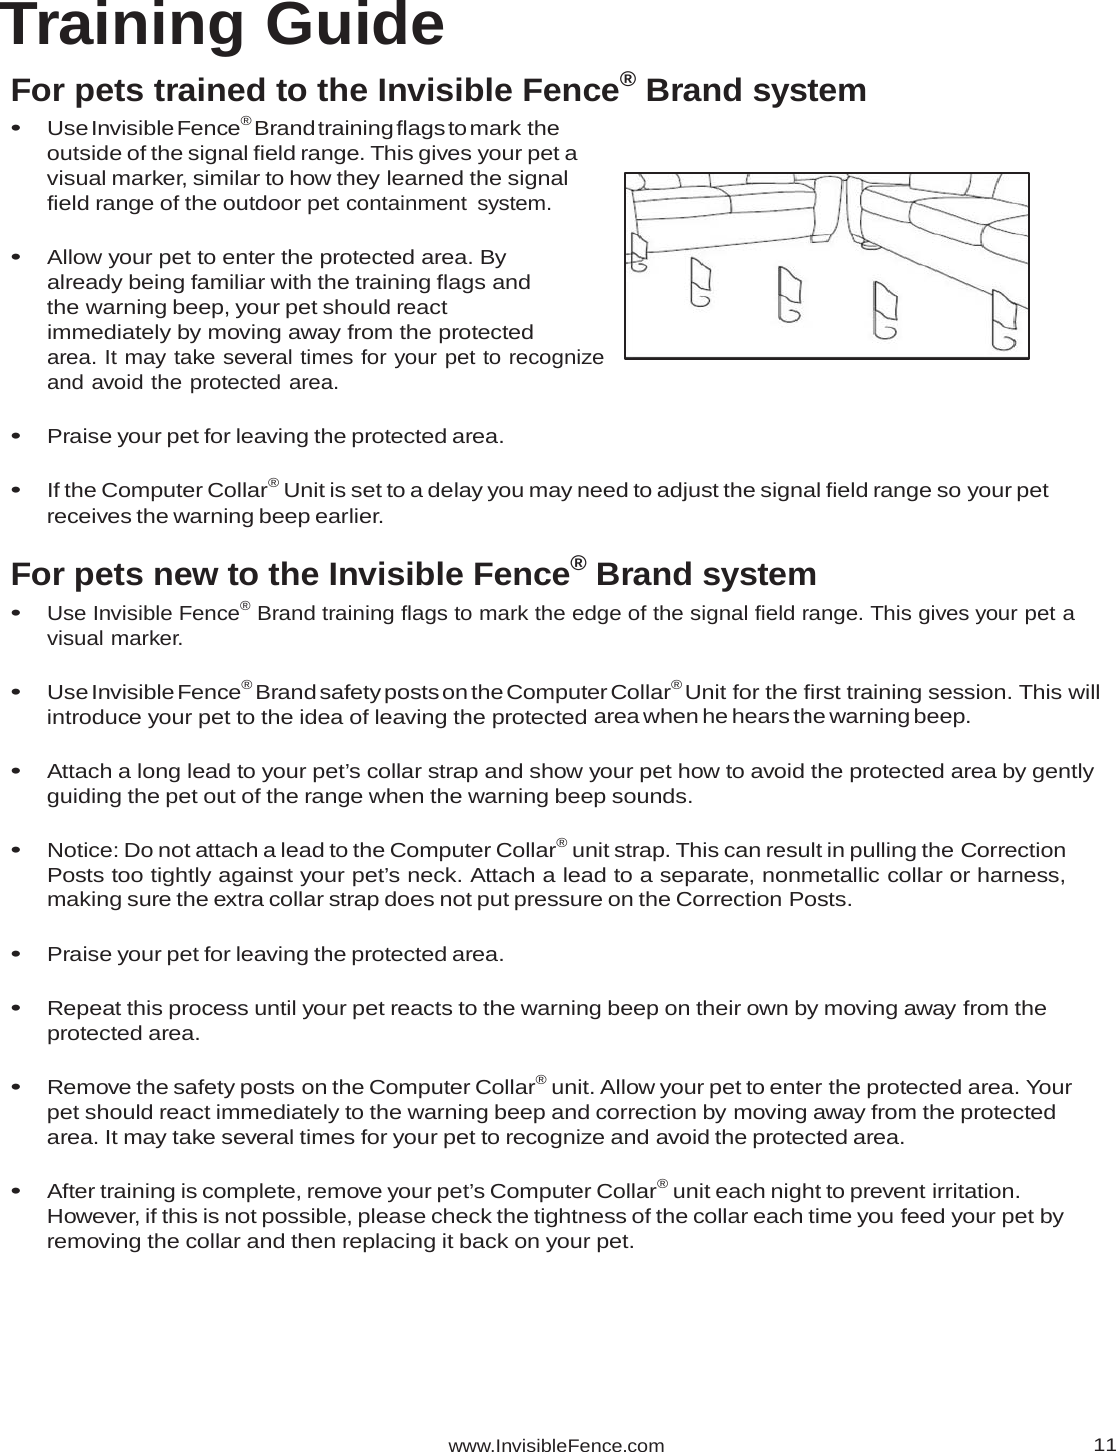 www.InvisibleFence.com11Training Guide For pets trained to the Invisible Fence® Brand system • Use Invisible Fence® Brand training flags to mark the outside of the signal field range. This gives your pet a visual marker, similar to how they learned the signal field range of the outdoor pet containment system. • Allow your pet to enter the protected area. By already being familiar with the training flags and the warning beep, your pet should react immediately by moving away from the protected area. It may take several times for your pet to recognize and avoid the protected area. • Praise your pet for leaving the protected area. • If the Computer Collar® Unit is set to a delay you may need to adjust the signal field range so your pet receives the warning beep earlier. For pets new to the Invisible Fence® Brand system • Use Invisible Fence® Brand training flags to mark the edge of the signal field range. This gives your pet a visual marker. • Use Invisible Fence® Brand safety posts on the Computer Collar® Unit for the first training session. This will introduce your pet to the idea of leaving the protected area when he hears the warning beep.  • Attach a long lead to your pet’s collar strap and show your pet how to avoid the protected area by gently guiding the pet out of the range when the warning beep sounds. • Notice: Do not attach a lead to the Computer Collar® unit strap. This can result in pulling the Correction Posts too tightly against your pet’s neck. Attach a lead to a separate, nonmetallic collar or harness, making sure the extra collar strap does not put pressure on the Correction Posts. • Praise your pet for leaving the protected area. • Repeat this process until your pet reacts to the warning beep on their own by moving away from the protected area. • Remove the safety posts on the Computer Collar® unit. Allow your pet to enter the protected area. Your pet should react immediately to the warning beep and correction by moving away from the protected area. It may take several times for your pet to recognize and avoid the protected area. • After training is complete, remove your pet’s Computer Collar® unit each night to prevent irritation. However, if this is not possible, please check the tightness of the collar each time you feed your pet by removing the collar and then replacing it back on your pet. 